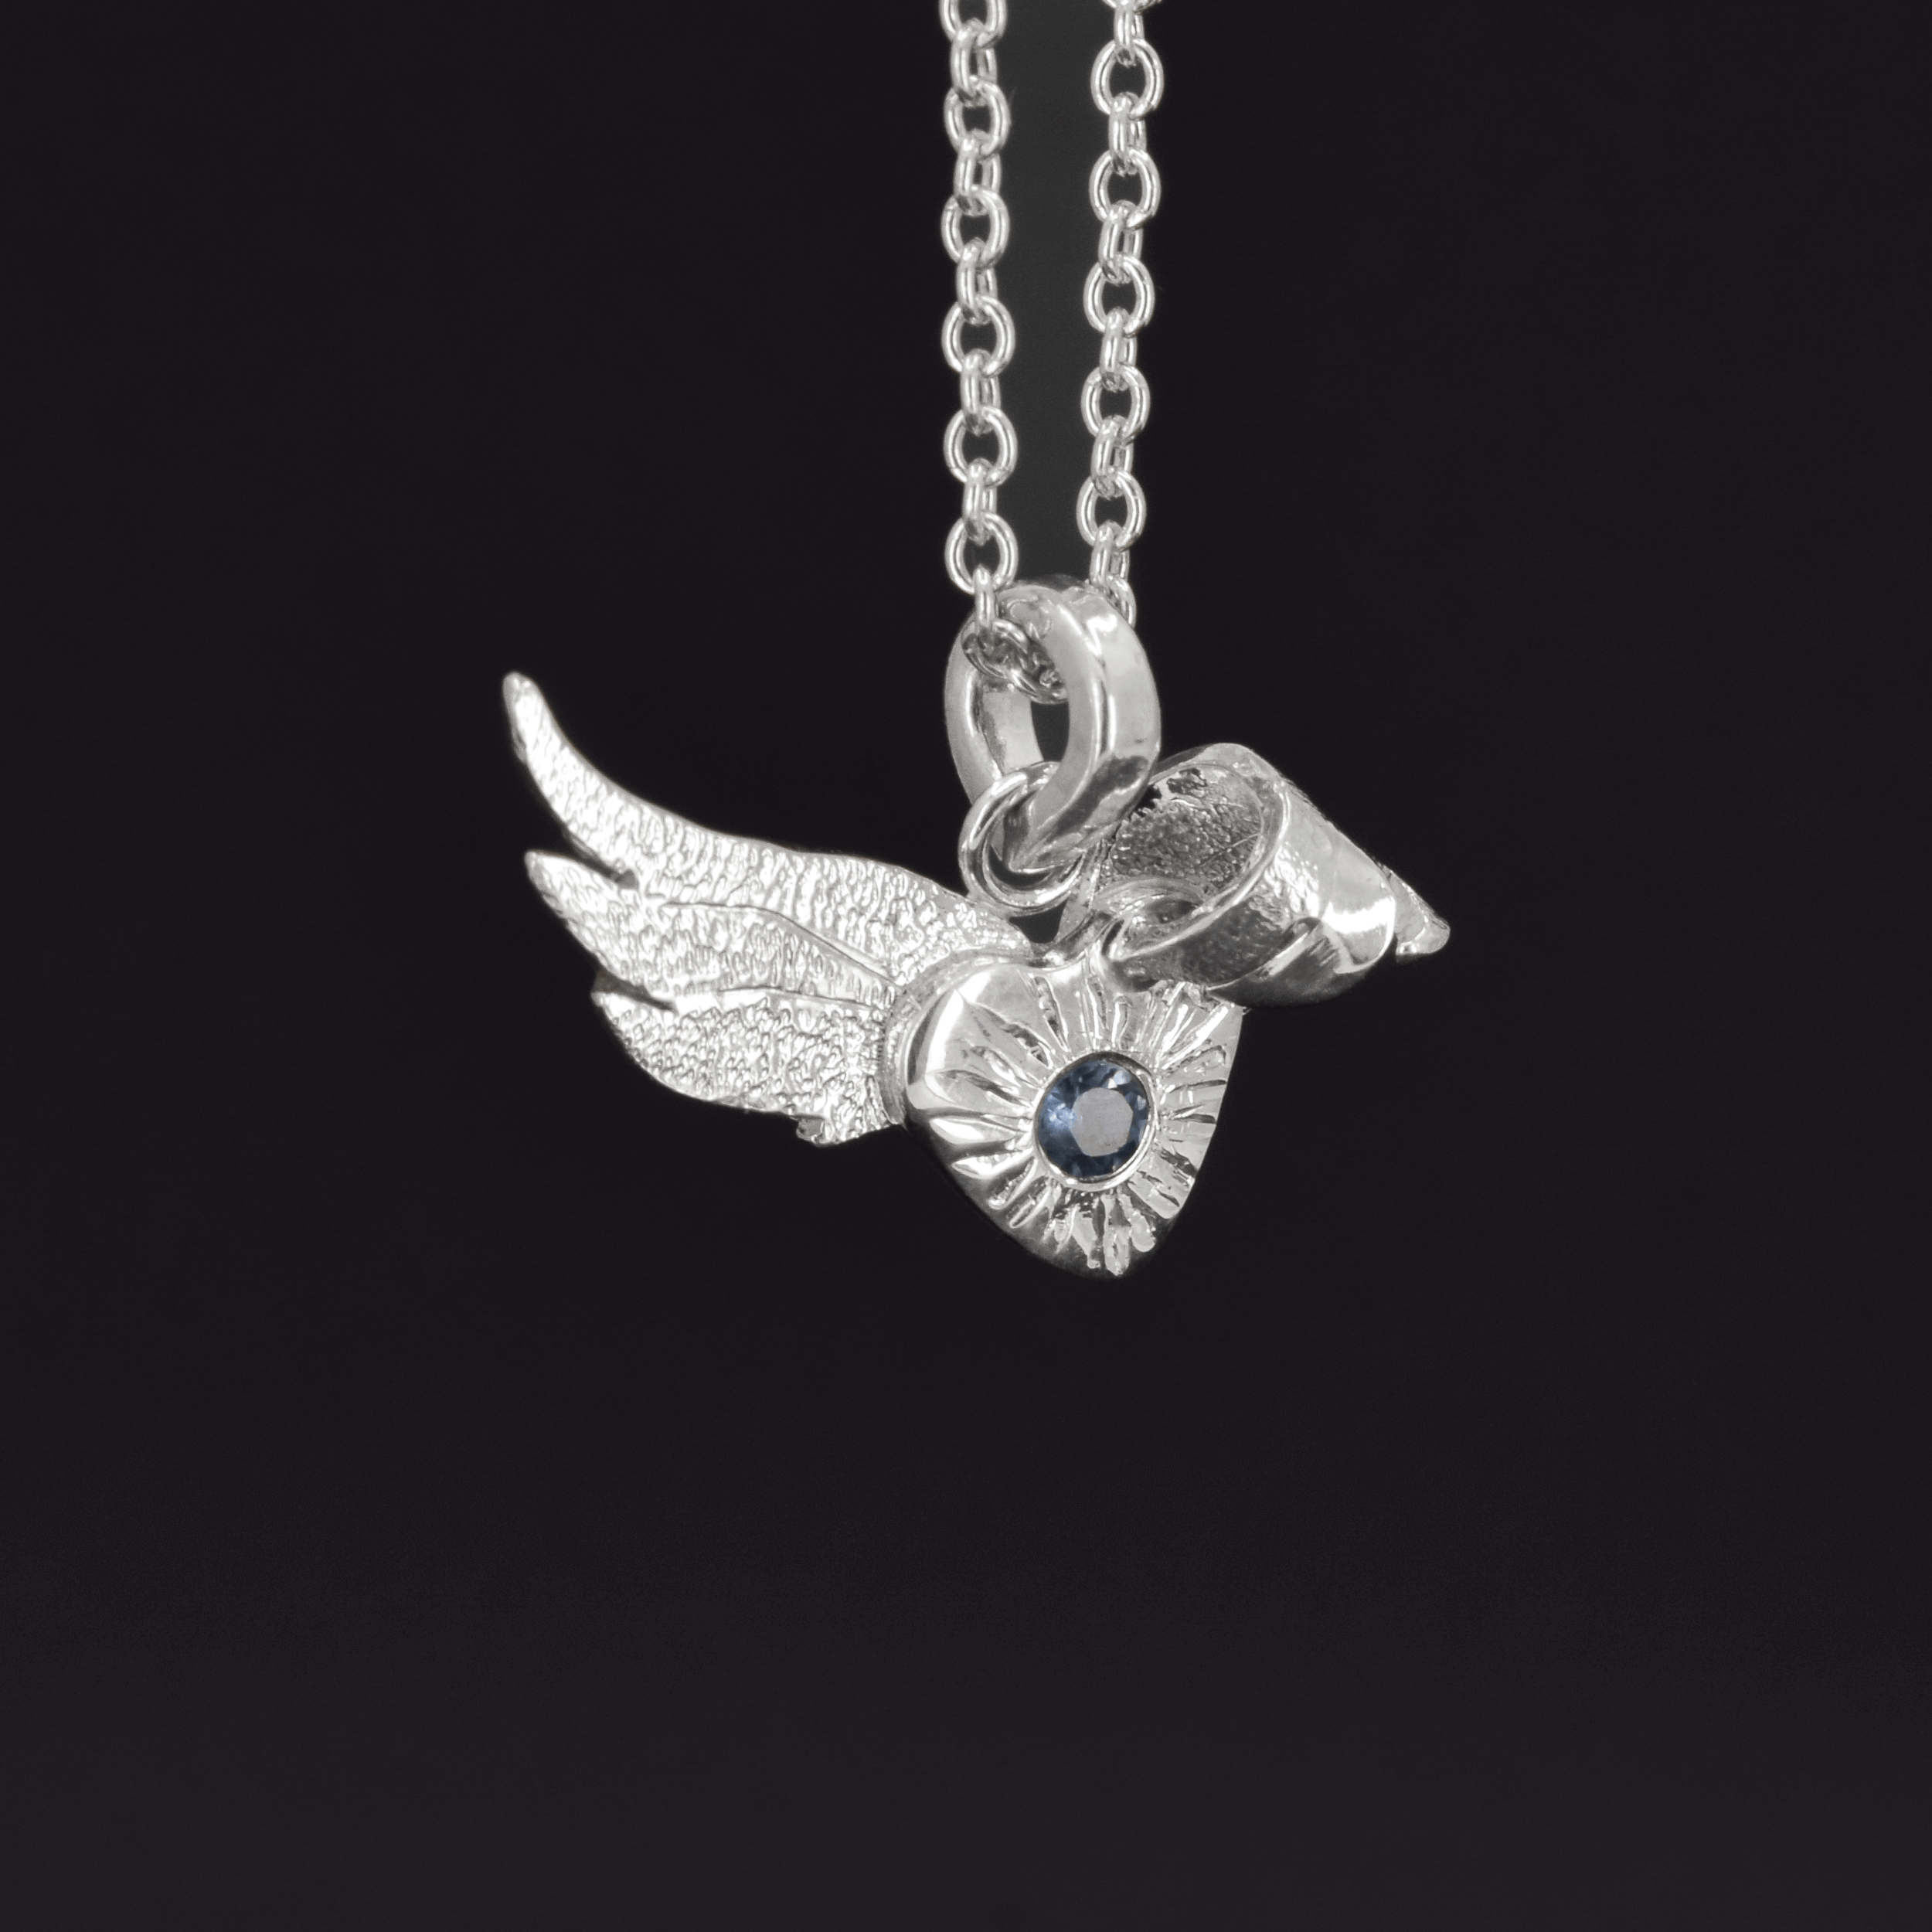 sterling silver angel wing pendant necklace with a flush set 4mm sapphire stone hanging from a cable chain. One of the wings is bent over the heart, which holds the stone.